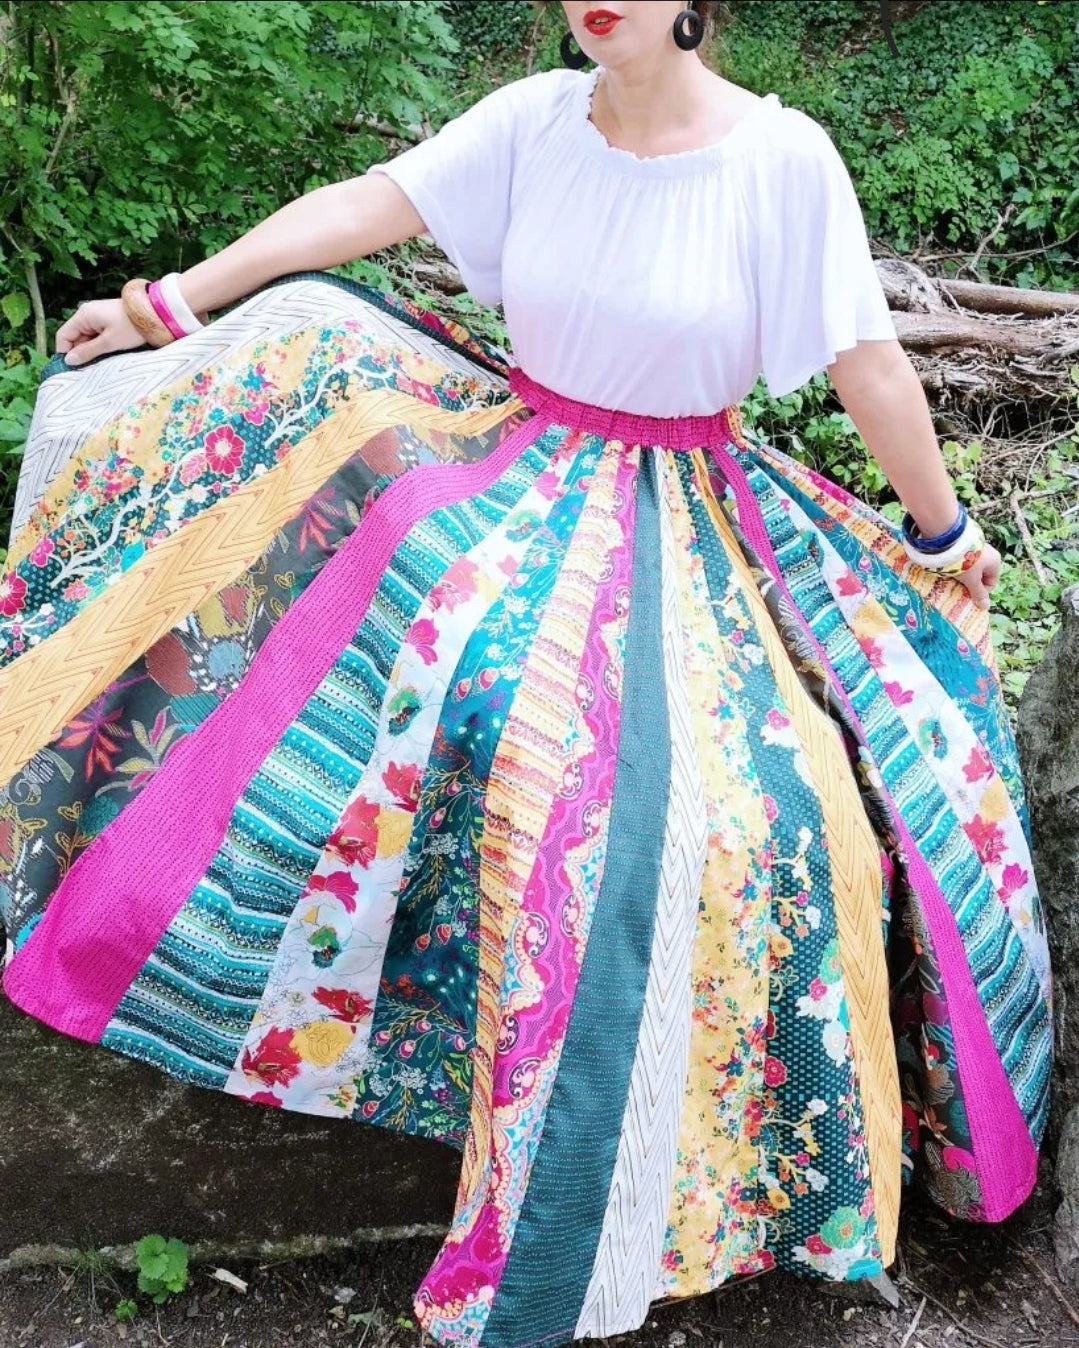 Turn Your Quilt Into A Skirt With Pockets